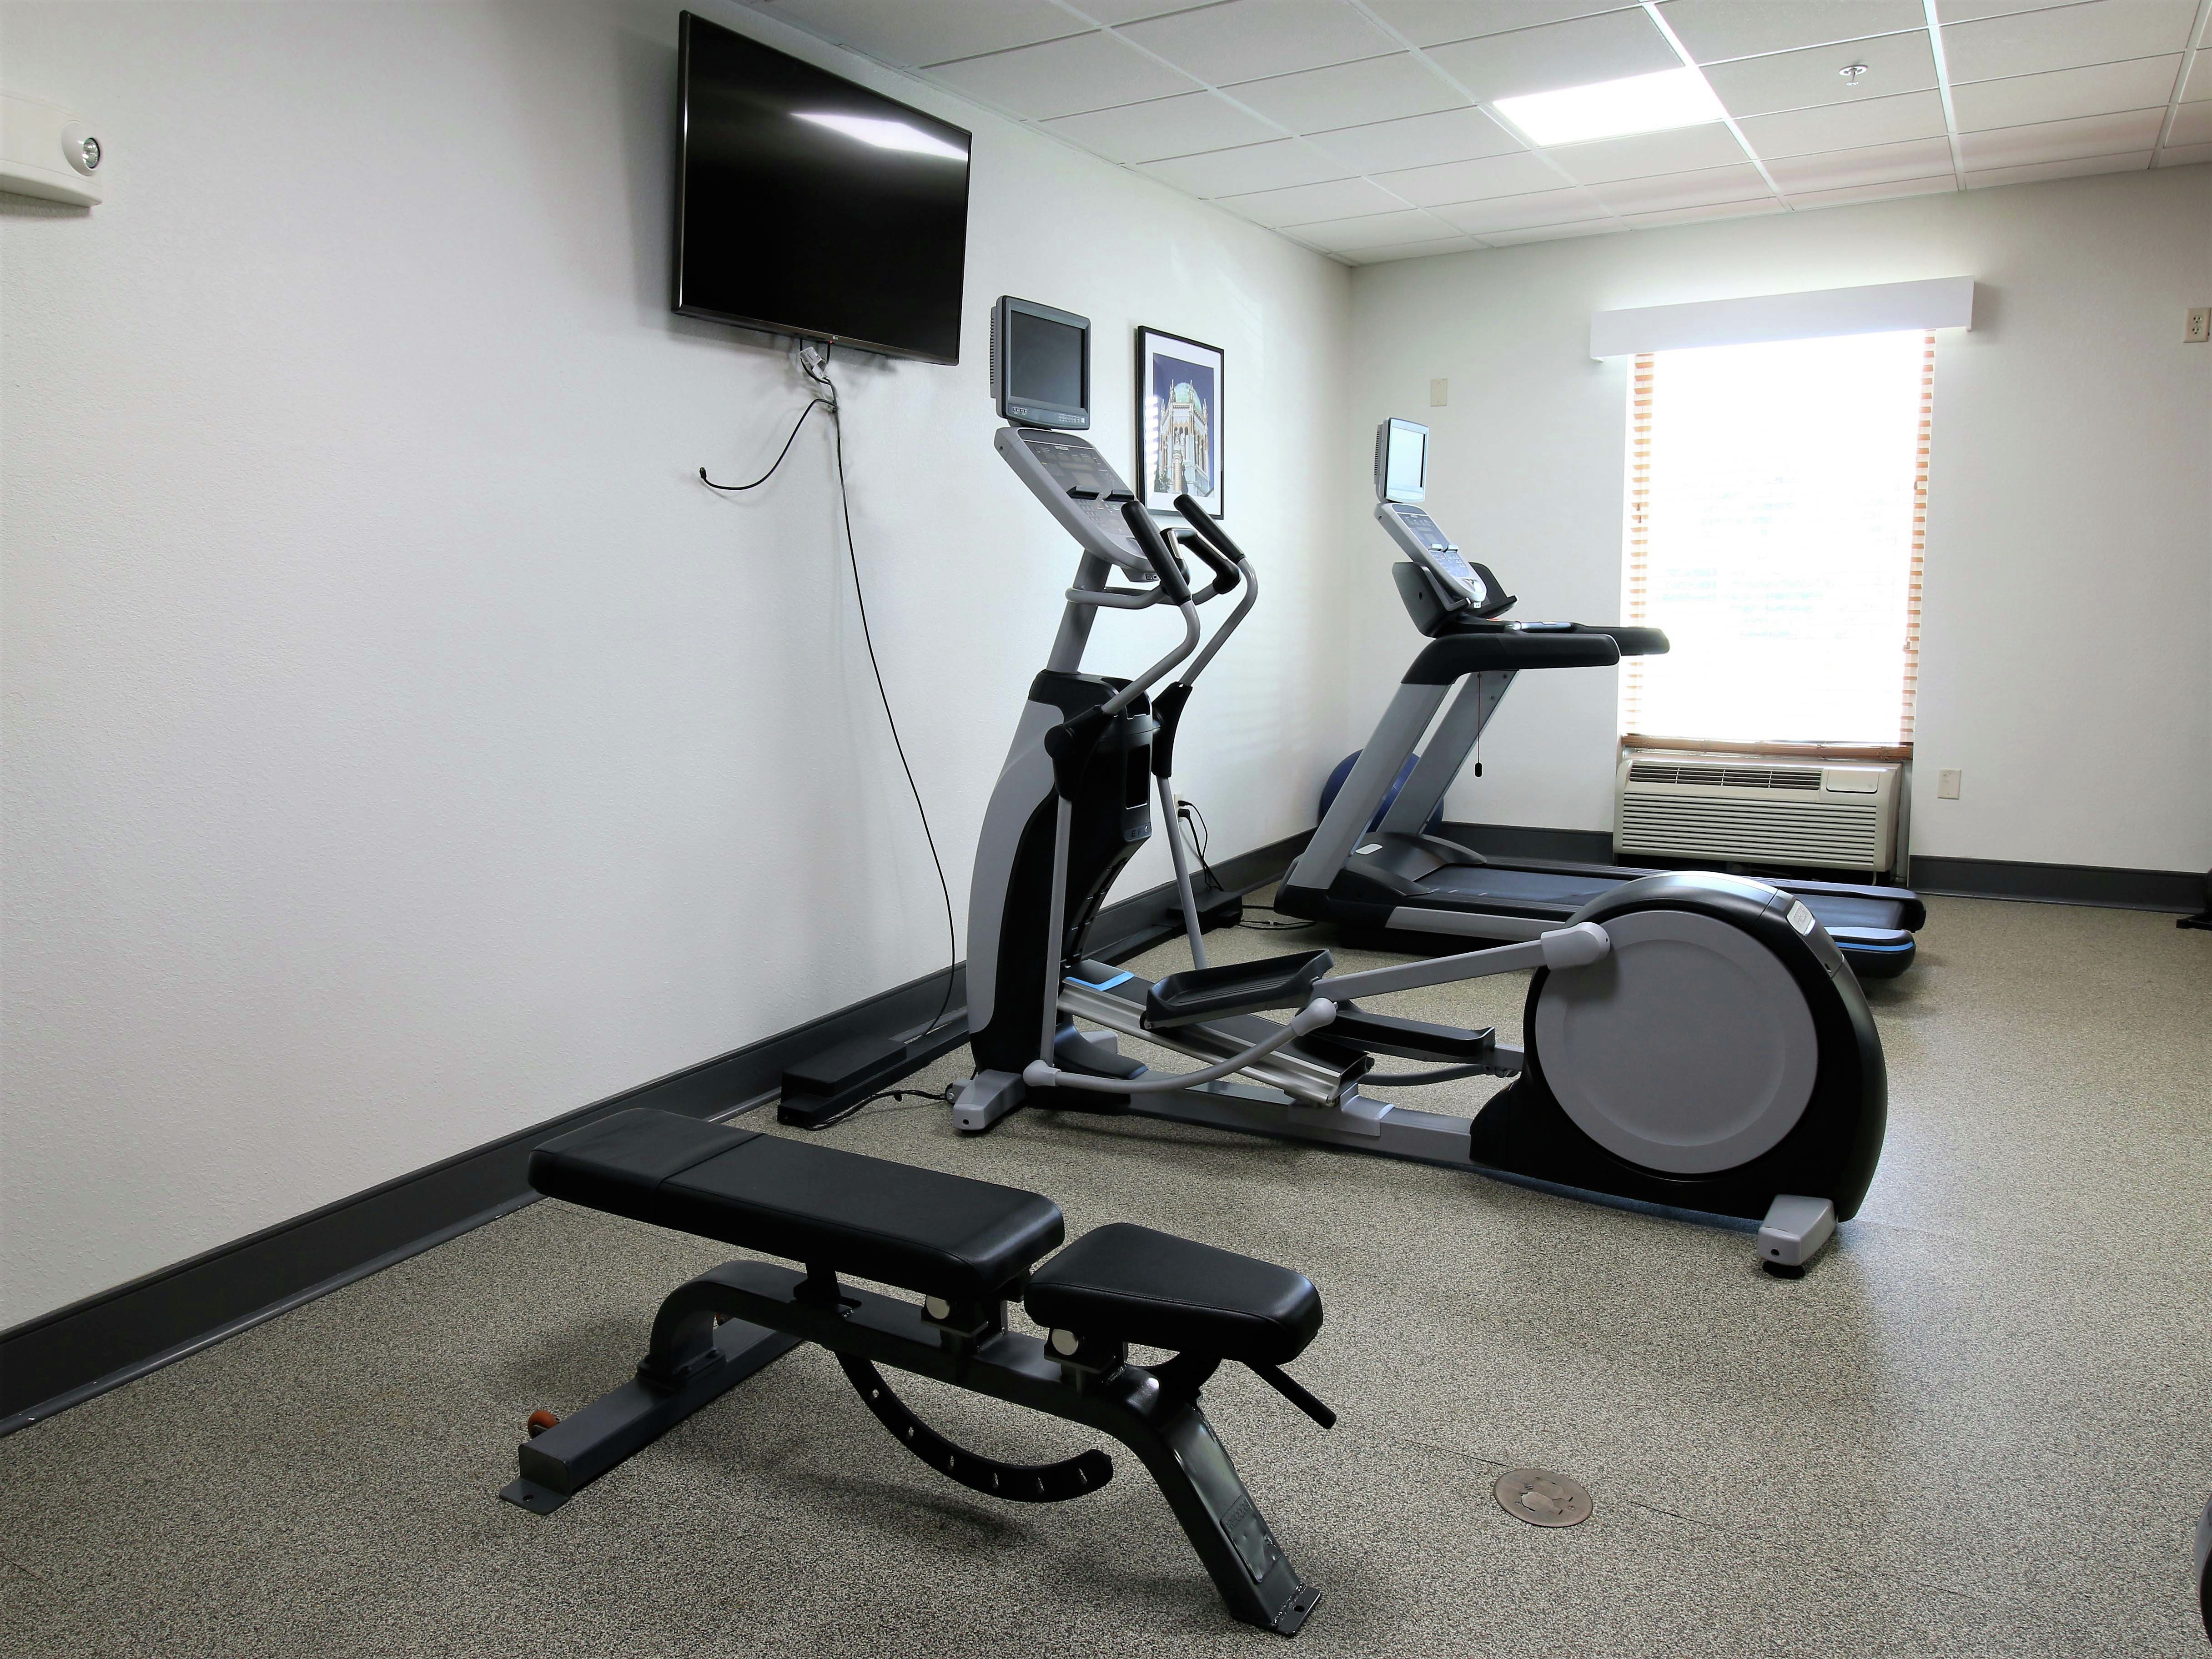 exercise equipment in a fitness center